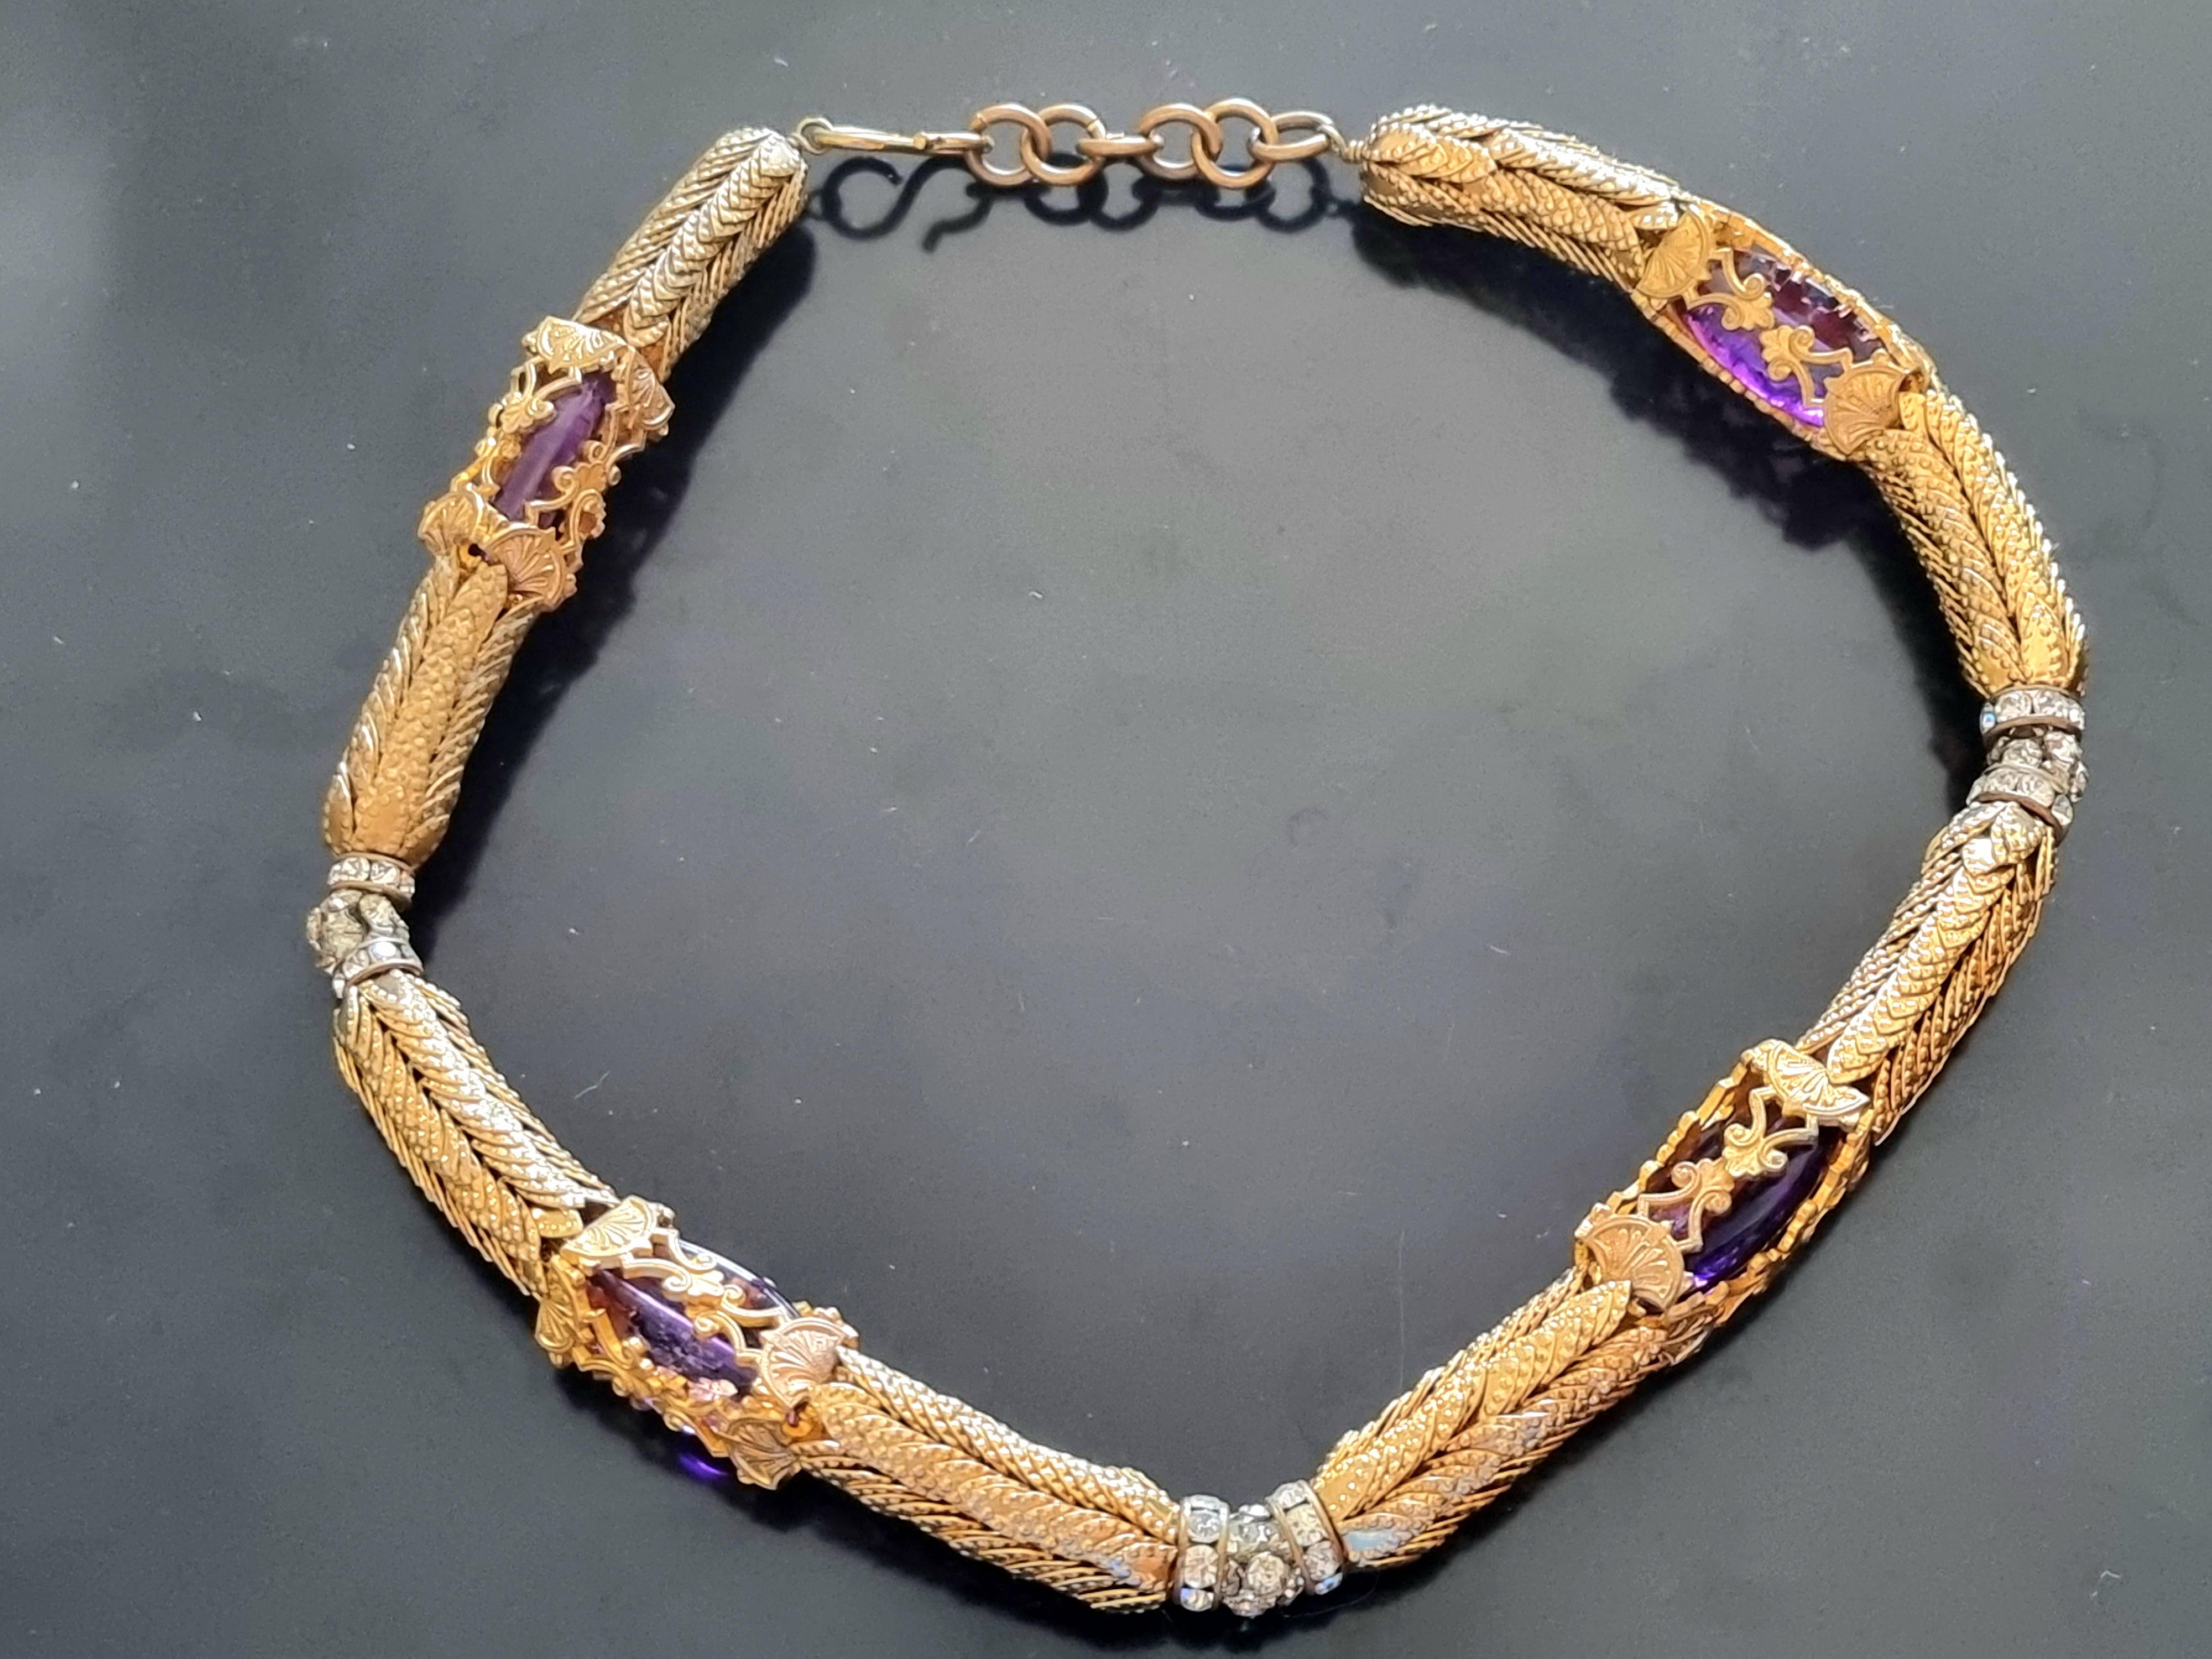 Beautiful old NECKLACE,
50s vintage,
by High Fashion designer Robert GOOSSENS,
total length 42 cm, length without clasp 37 cm, weight 84 g,
extraordinary work, exceptional quality,
good condition.

Robert Goossens was born in 1927 in Paris. His